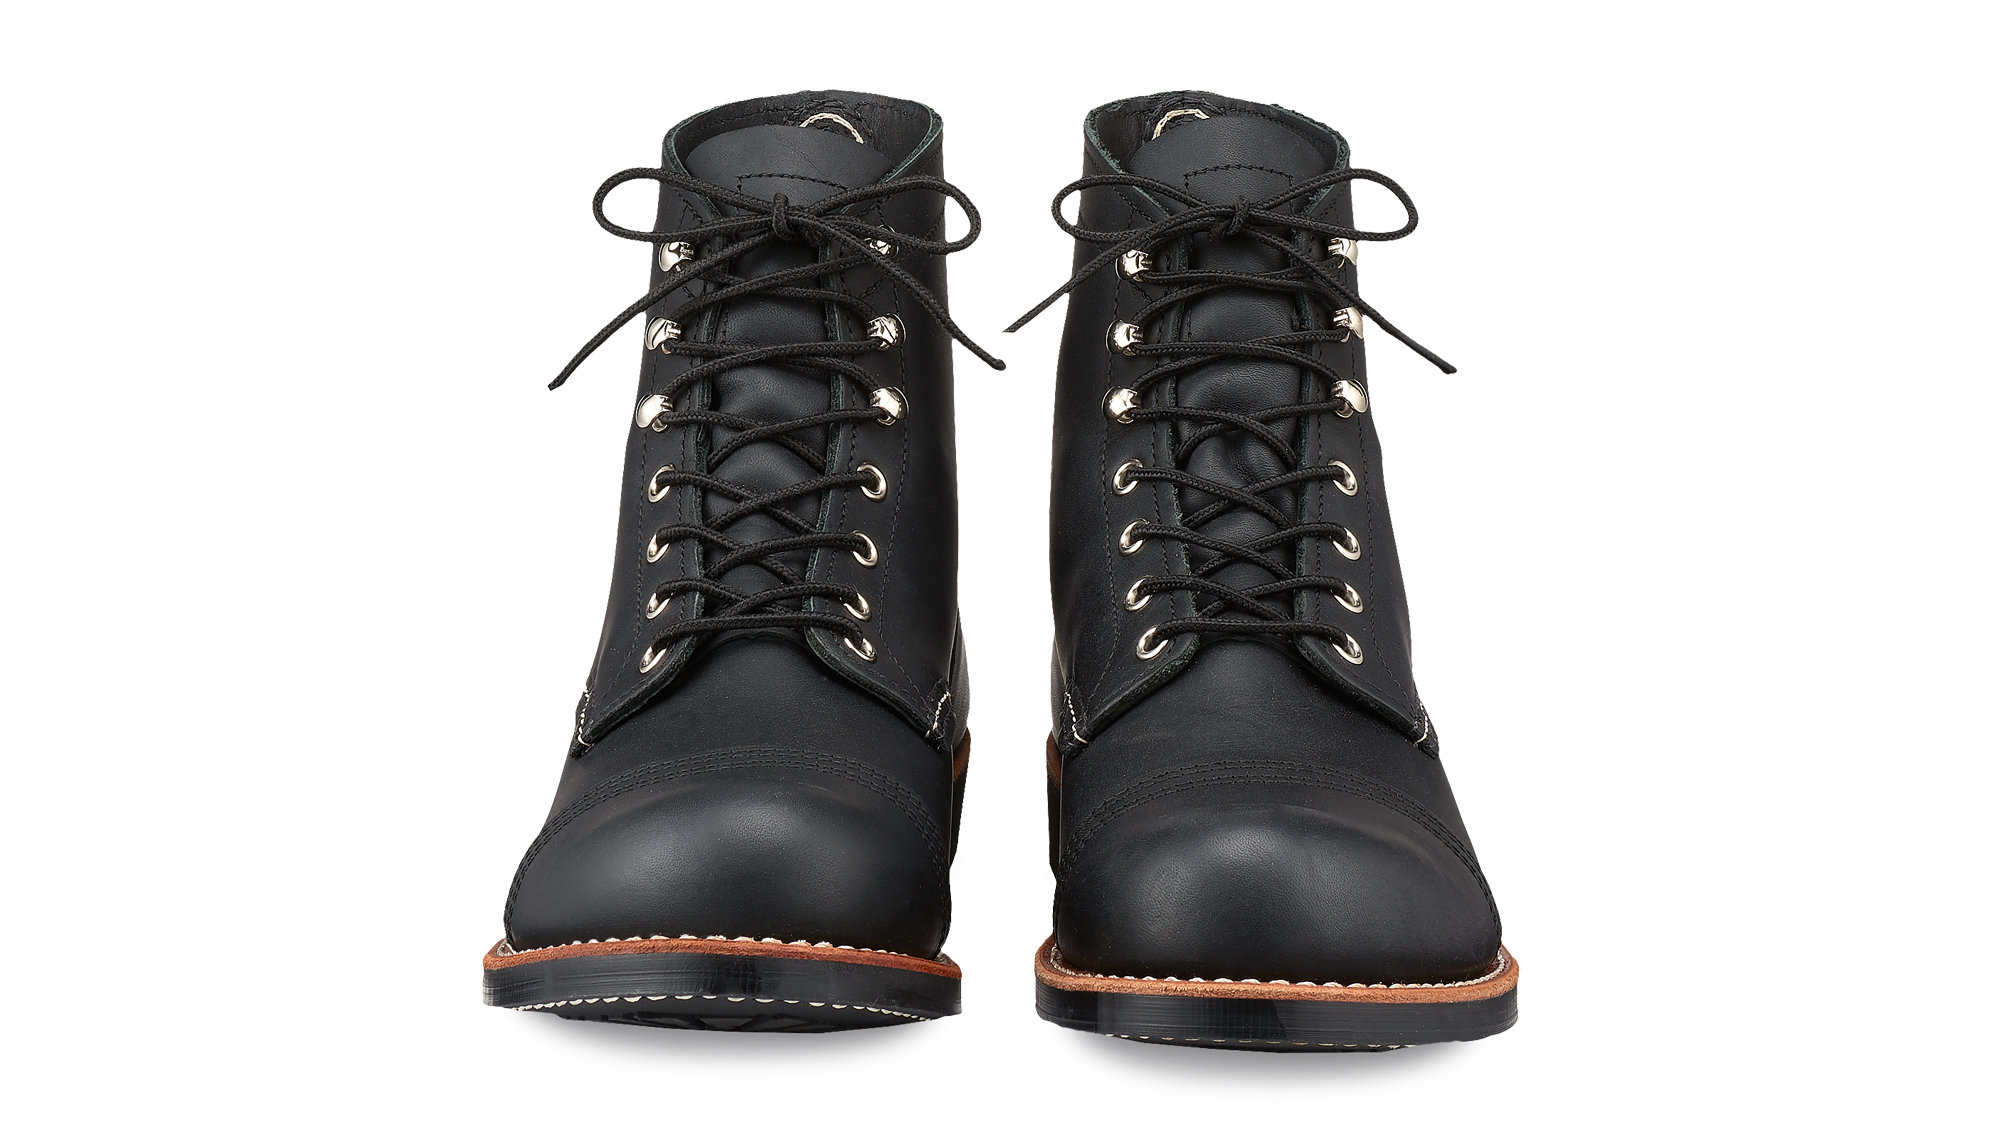 Shop the Iron Ranger 8084 | Official Red Wing Shoes Online Store